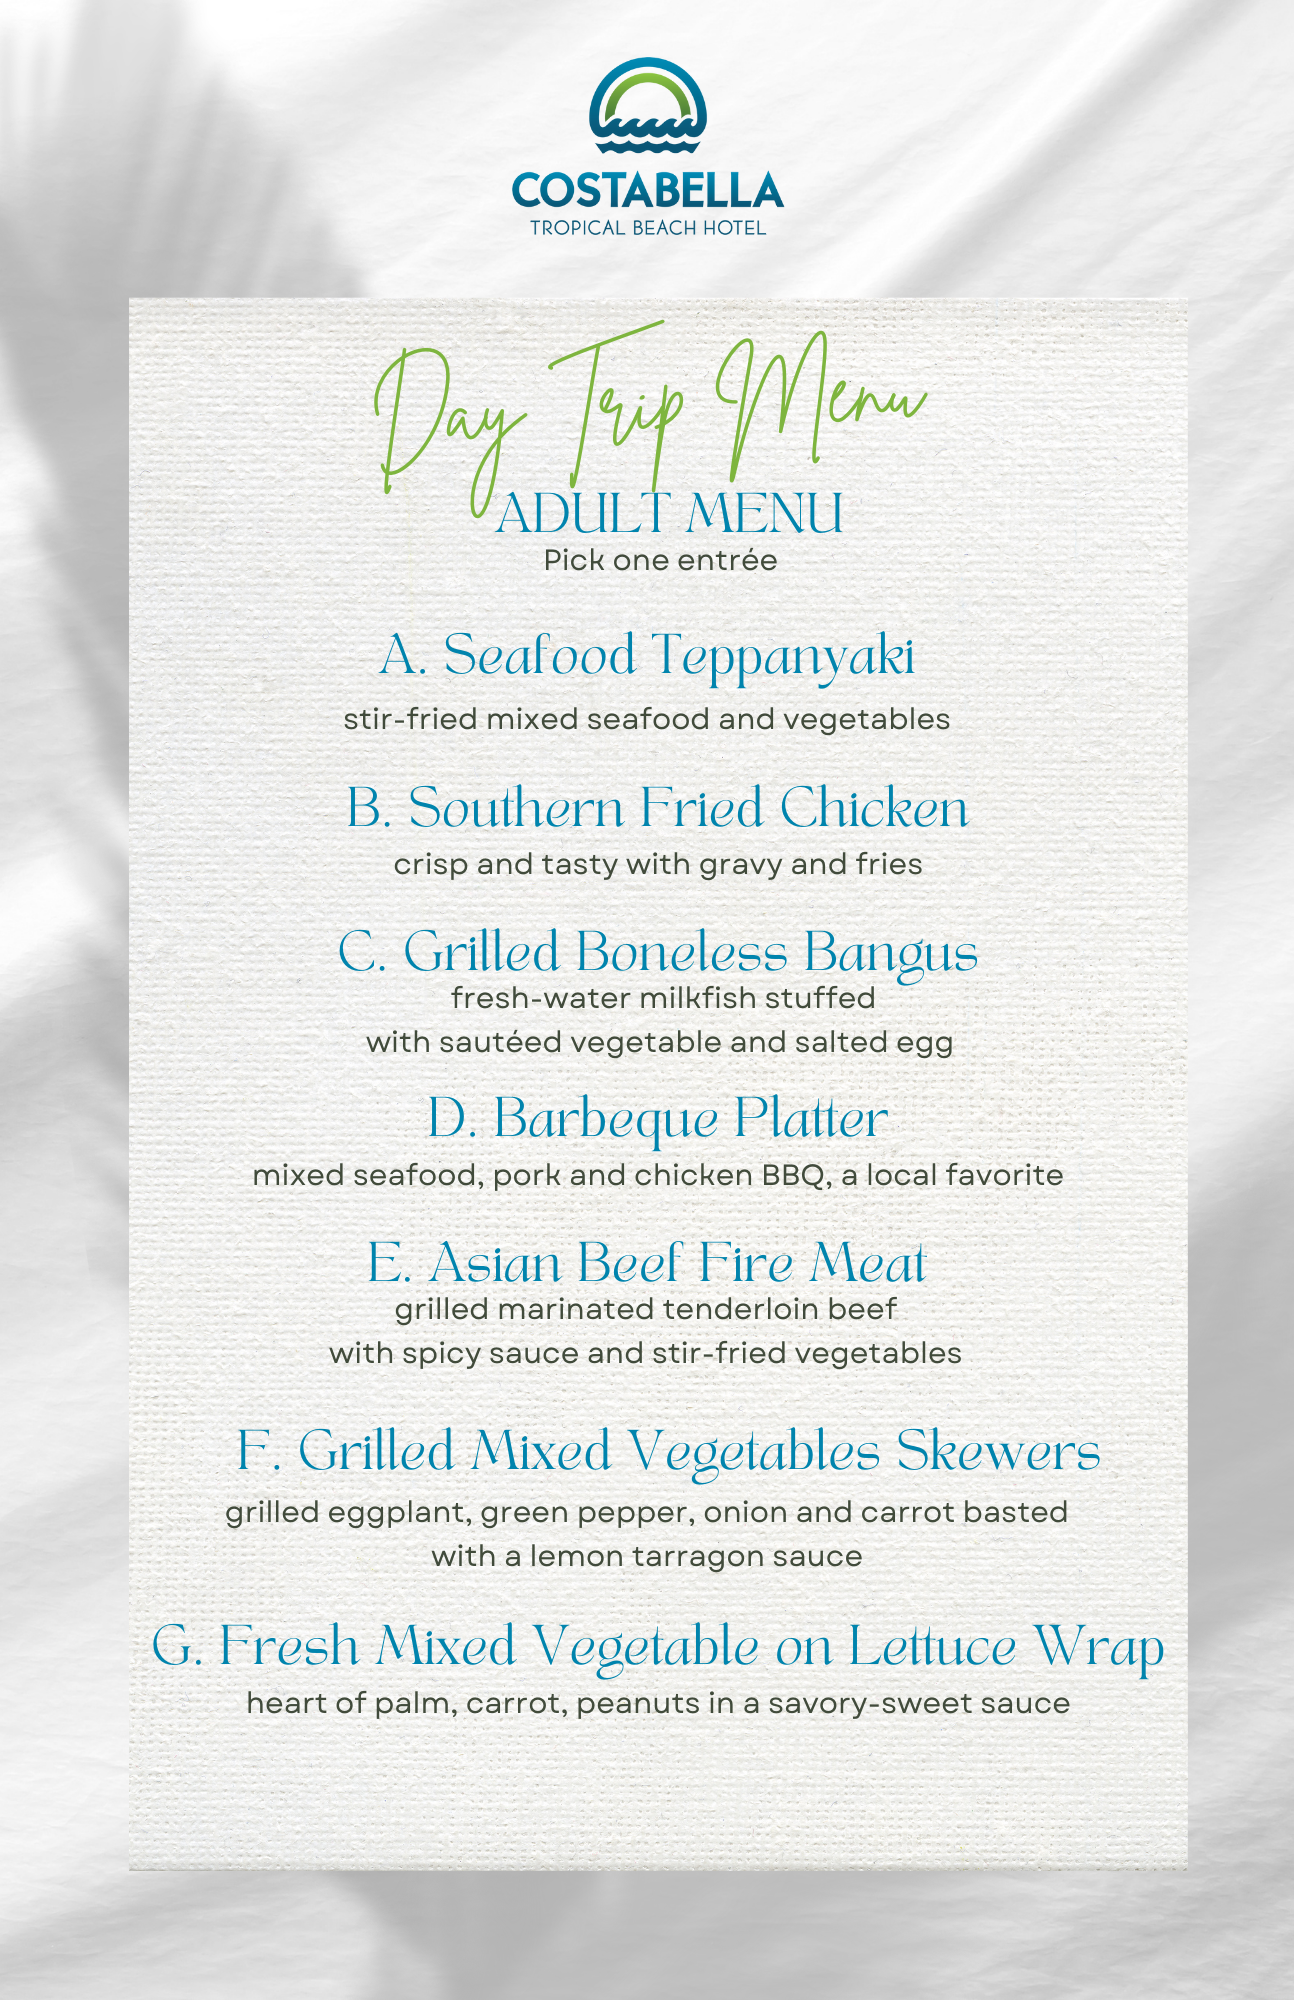 Select scrumptious dishes from theDay Trip Menu for Adults